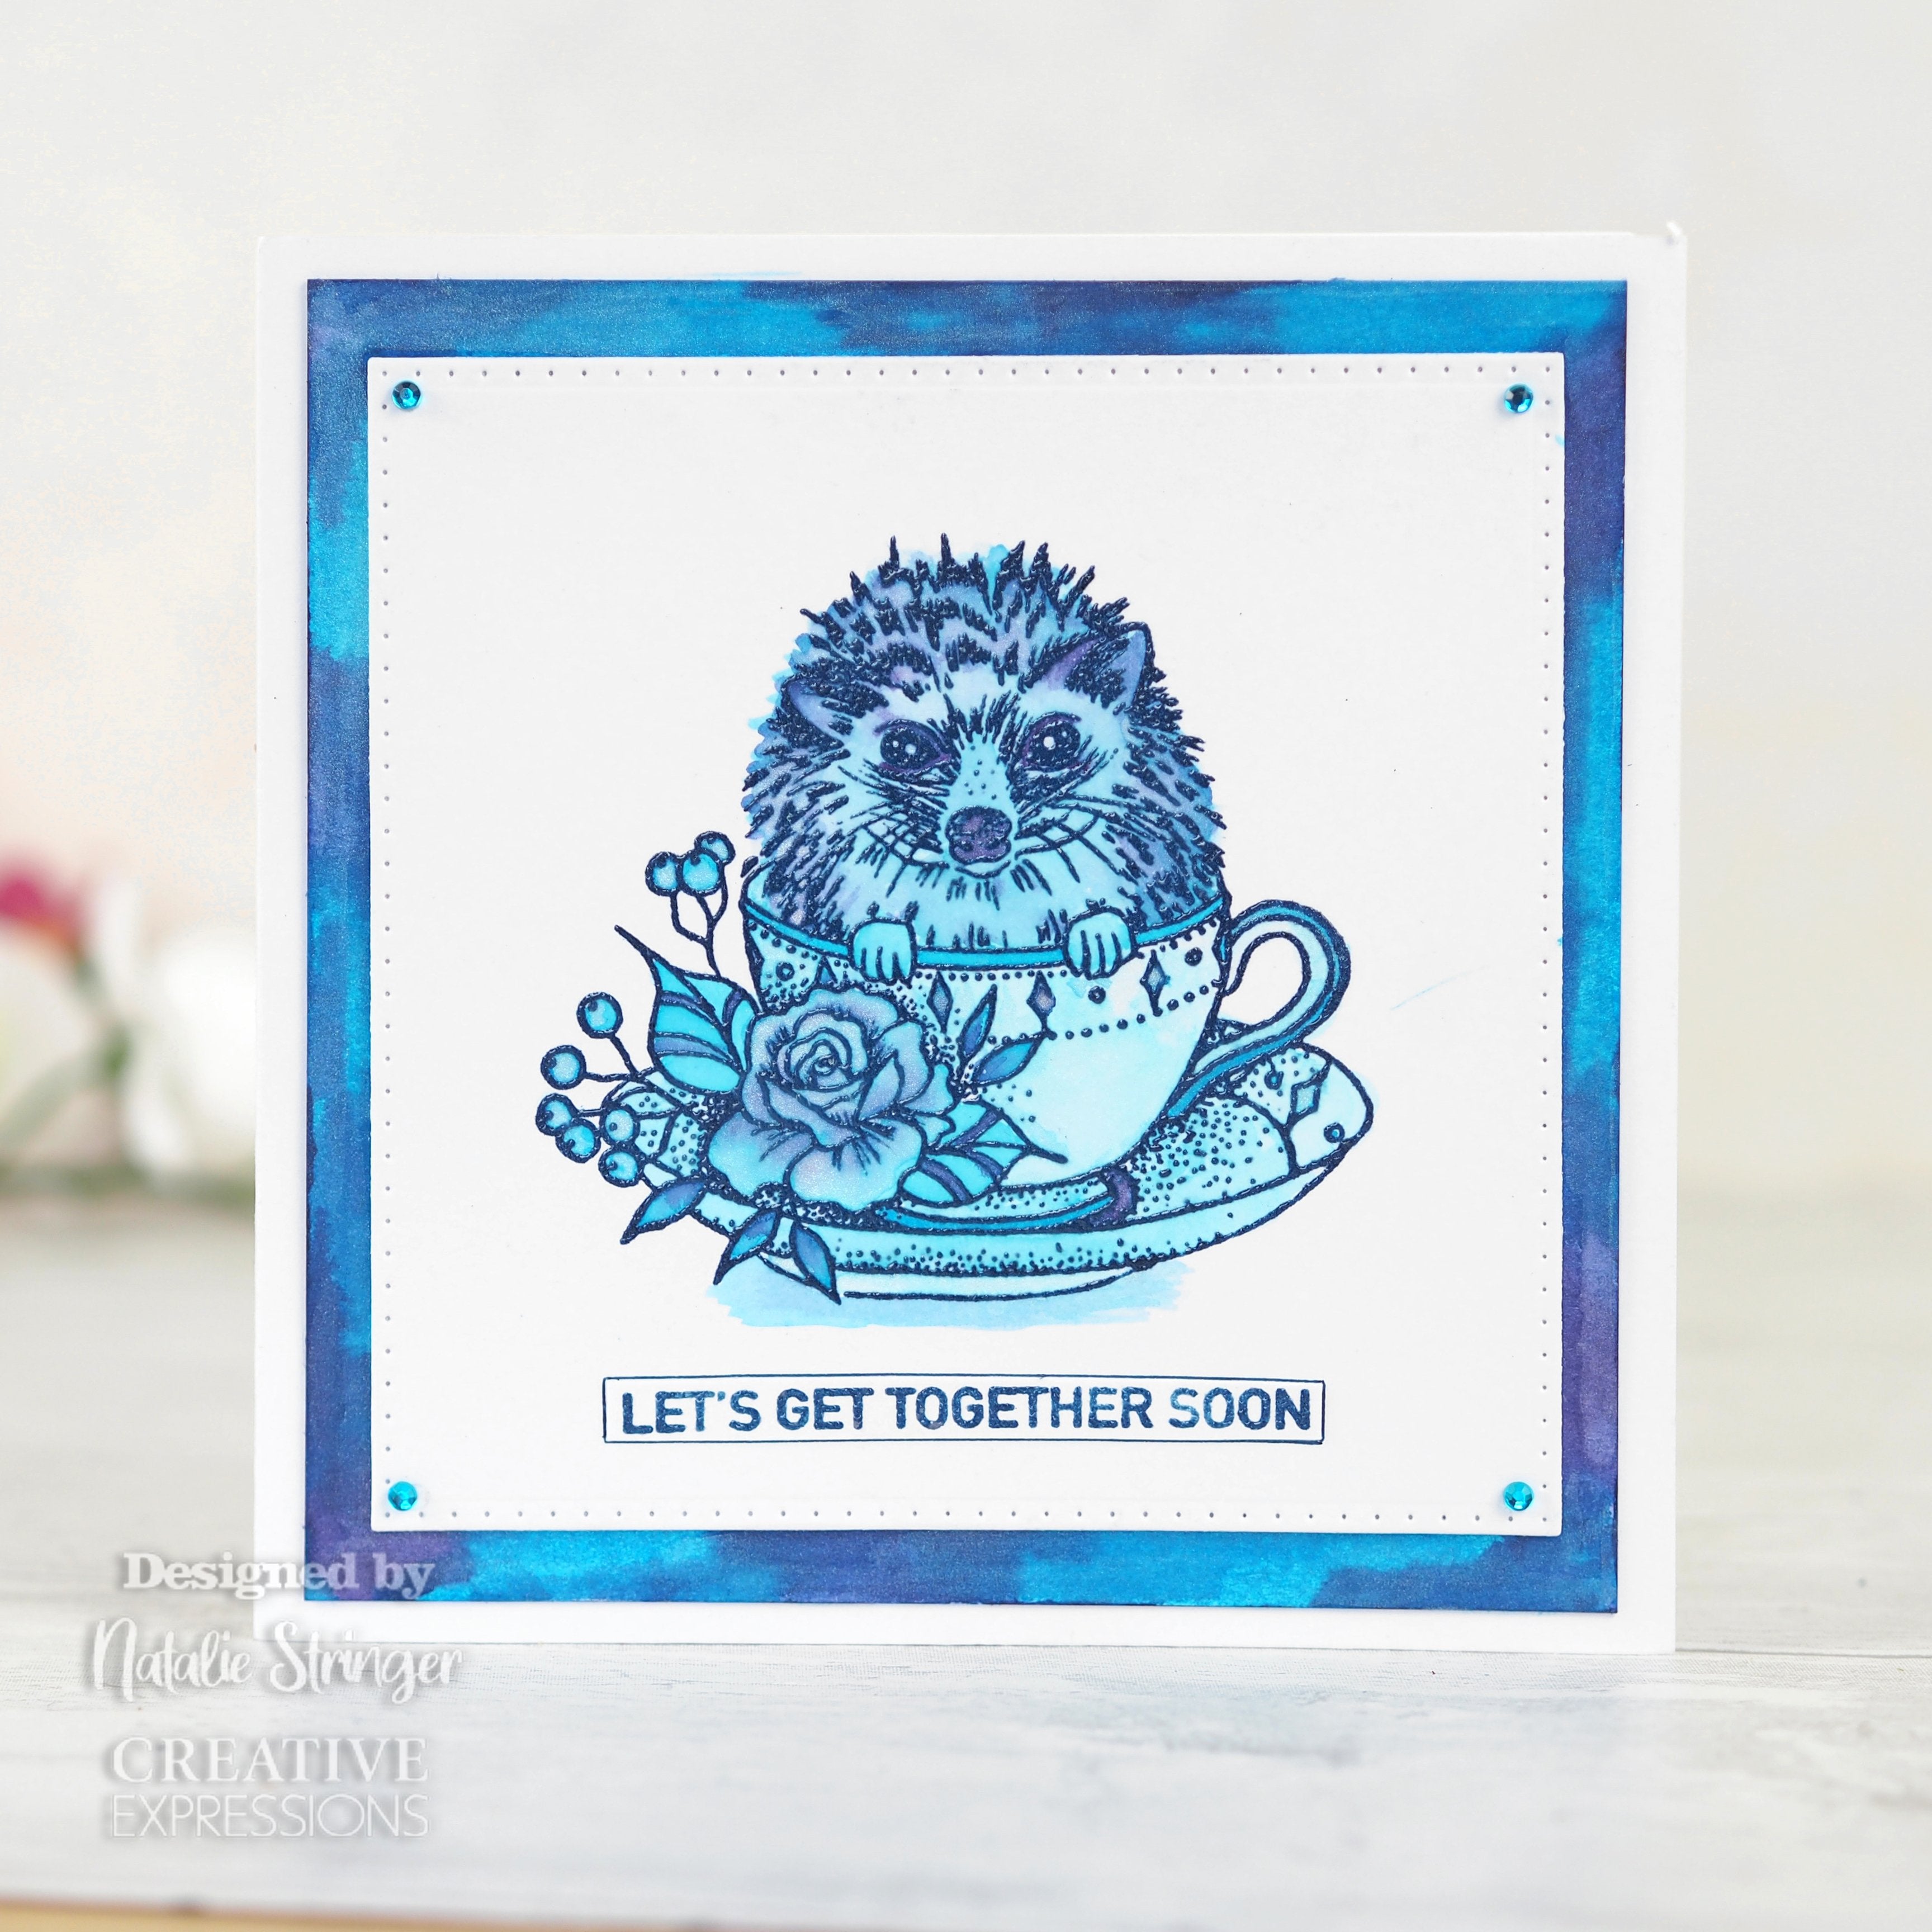 Creative Expressions Designer Boutique Collection Time For Tea A6 Clear Stamp Set